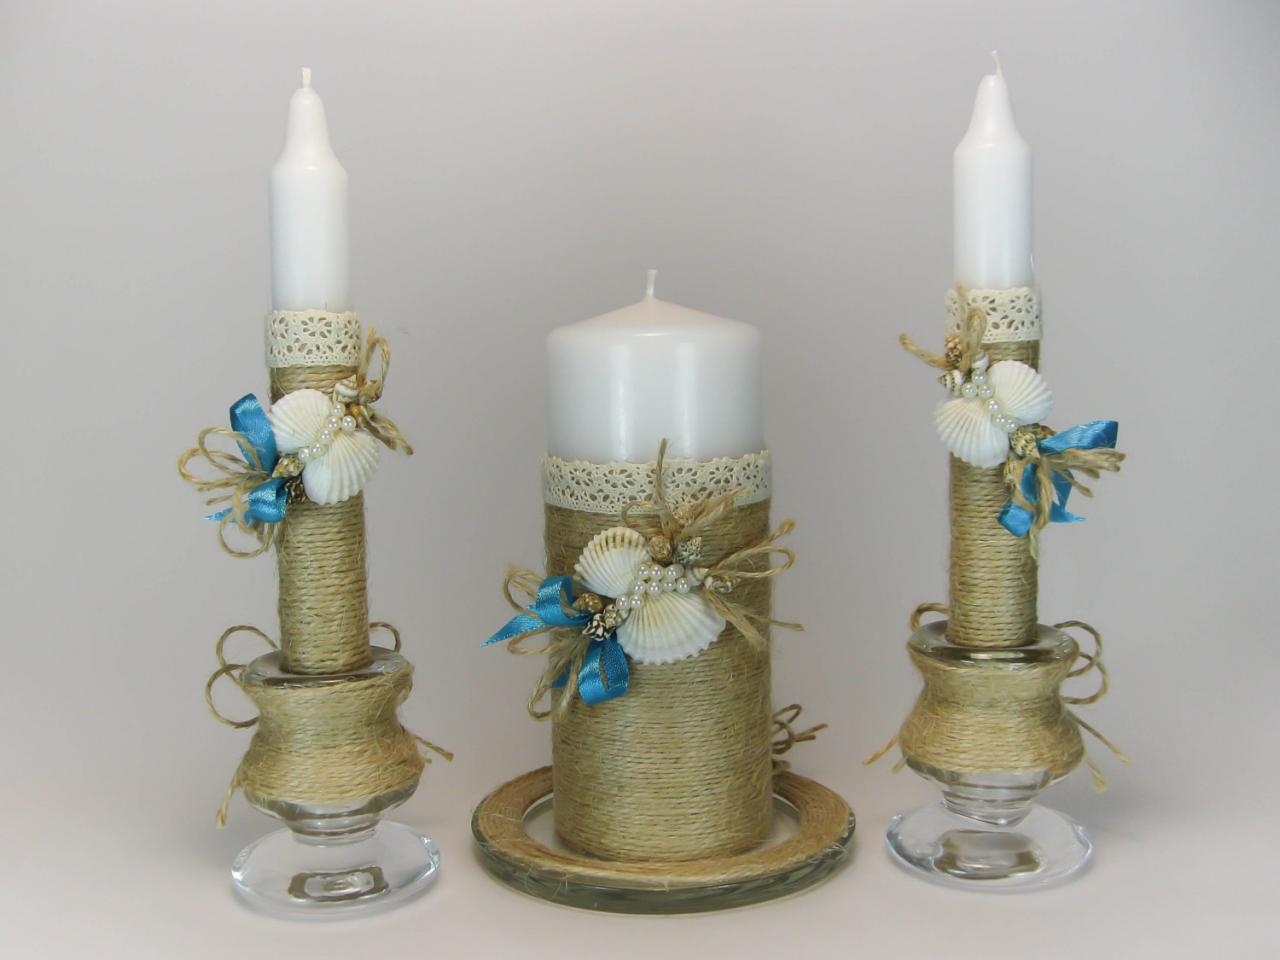 Handmade Rustic Wedding Unity Candles, Seashells, Beach Wedding, Pillar Candle, Taper Candles, Personalized Candles, Unity Candle Set